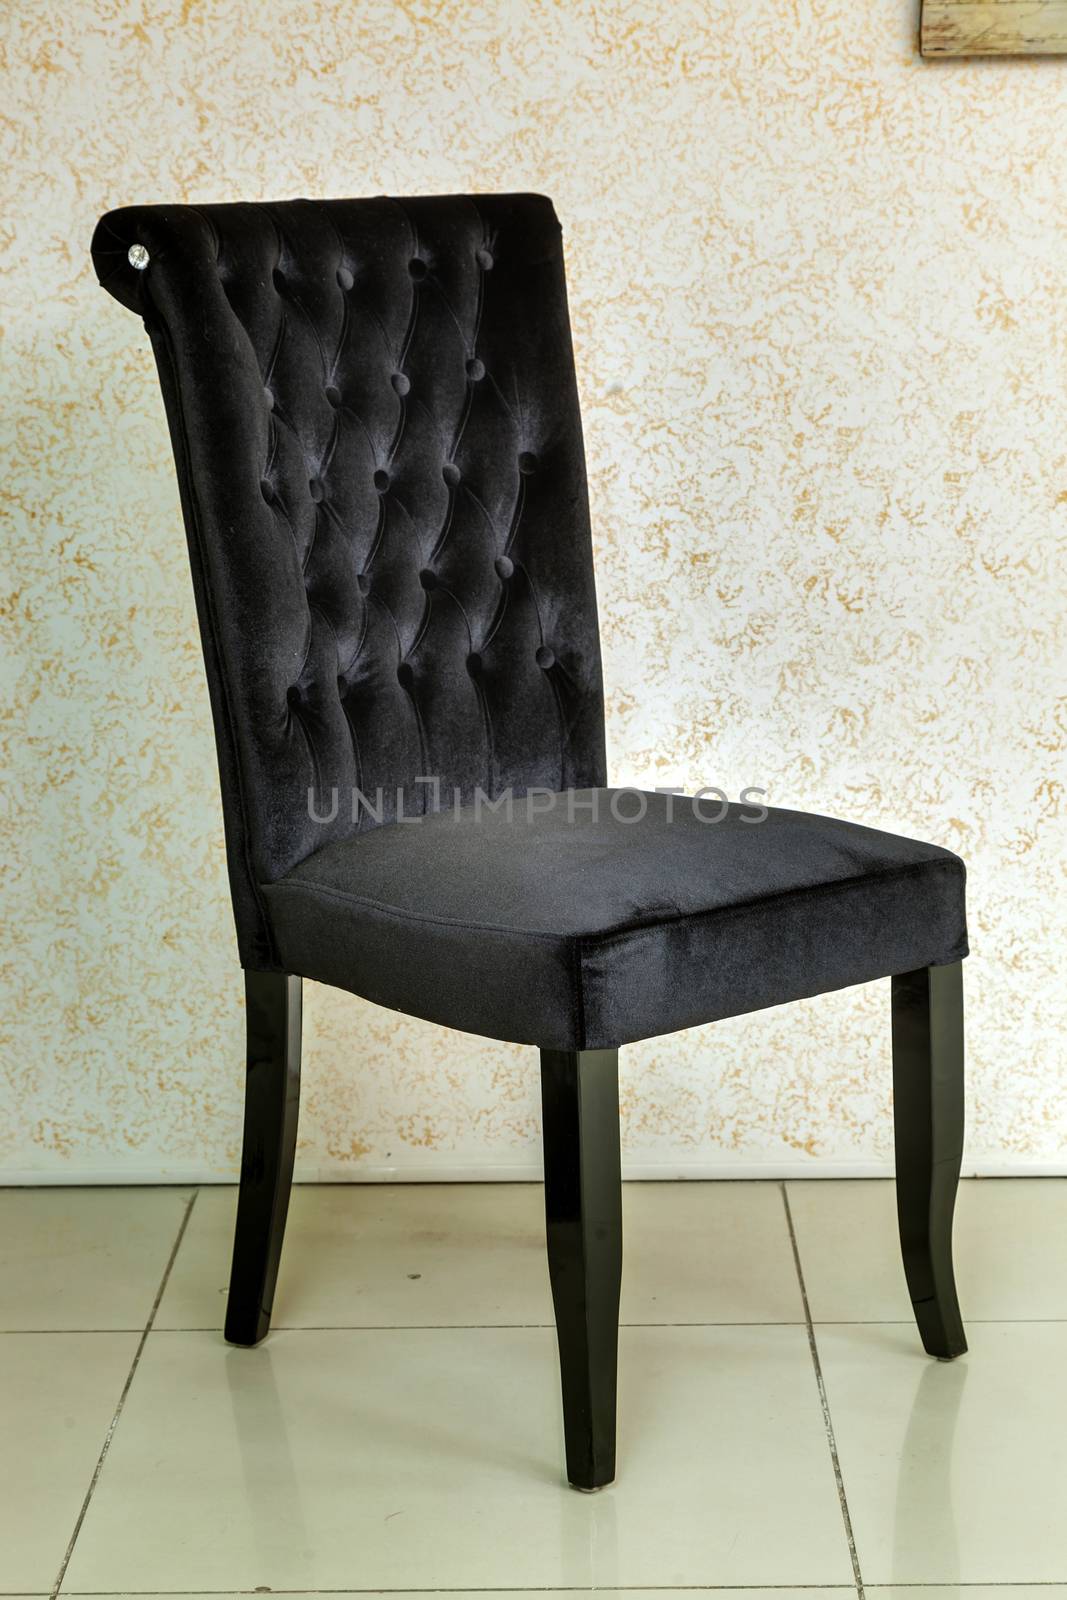 magnificent black chair by sveter